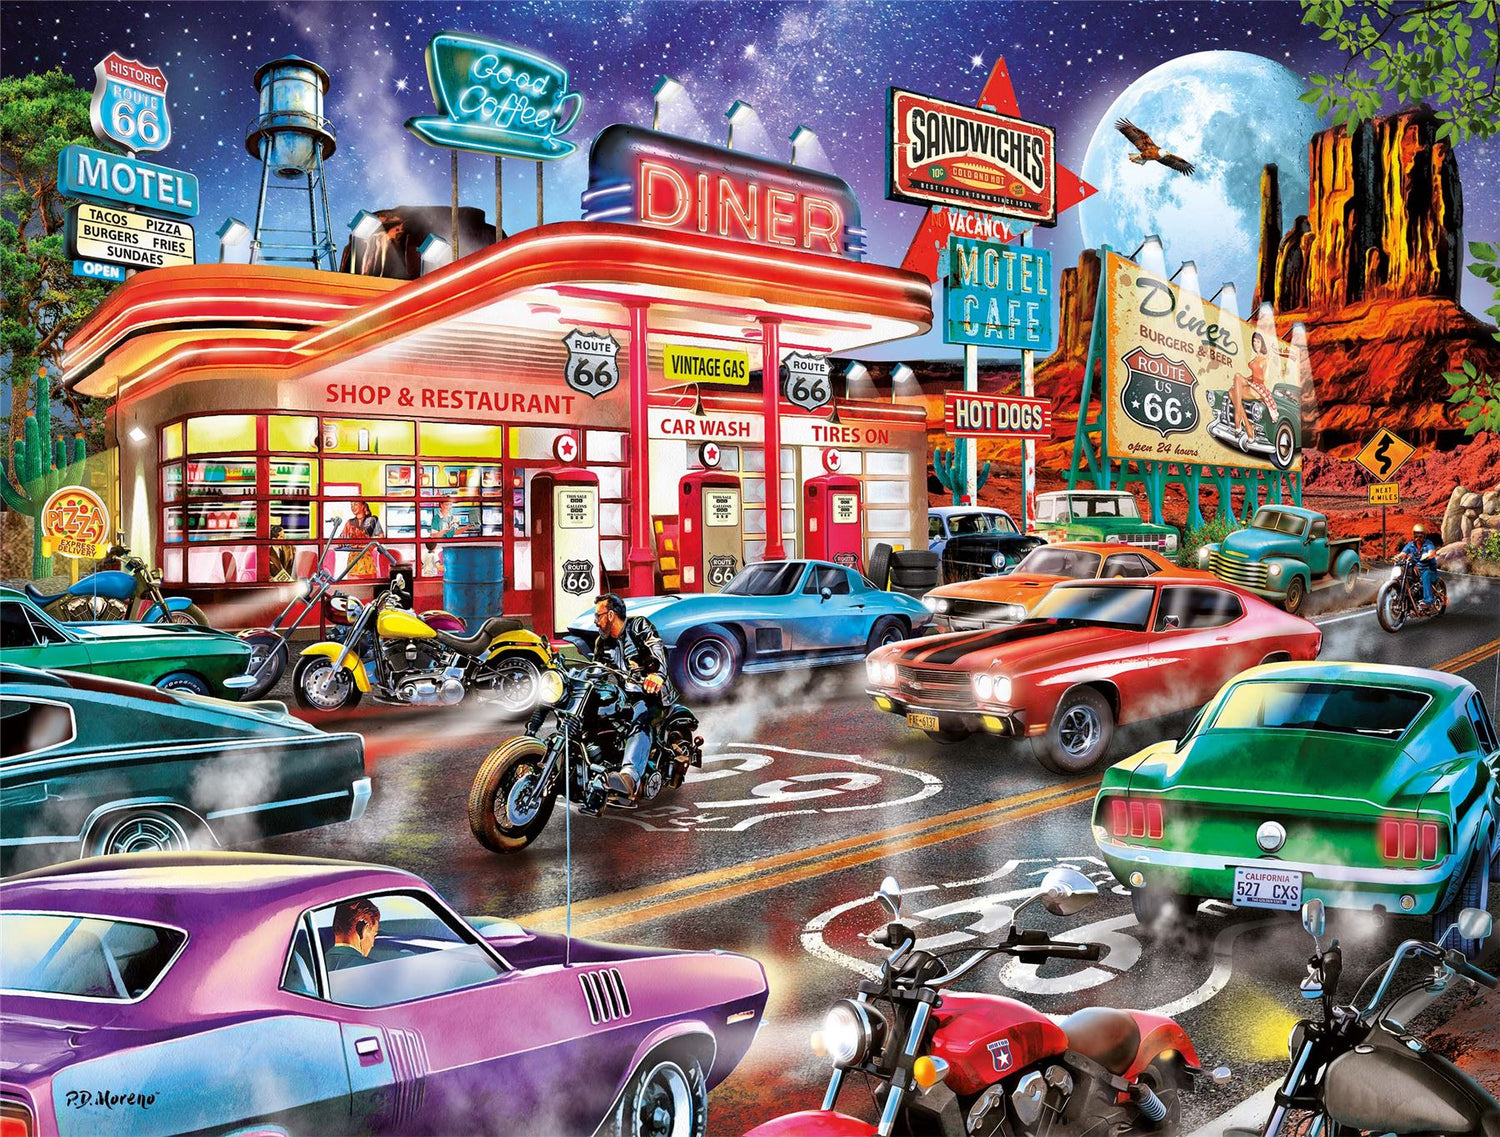 Jigsaw Puzzles for Adults -  nostalgic puzzles, scenic jigsaws and more!